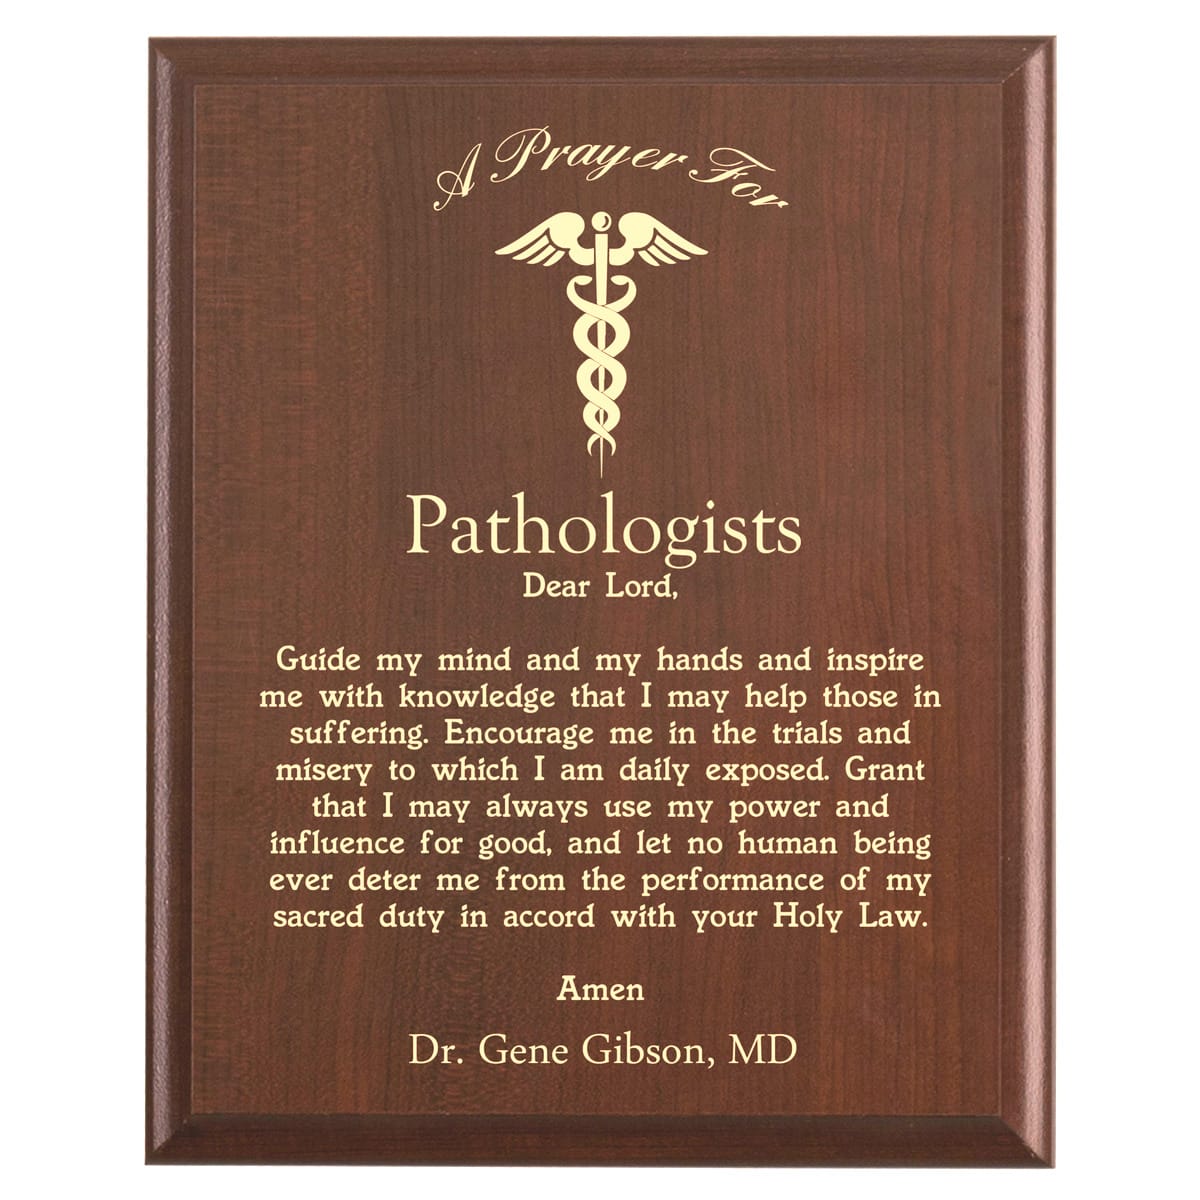 Plaque photo: Pathologists Prayer Plaque design with free personalization. Wood style finish with customized text.